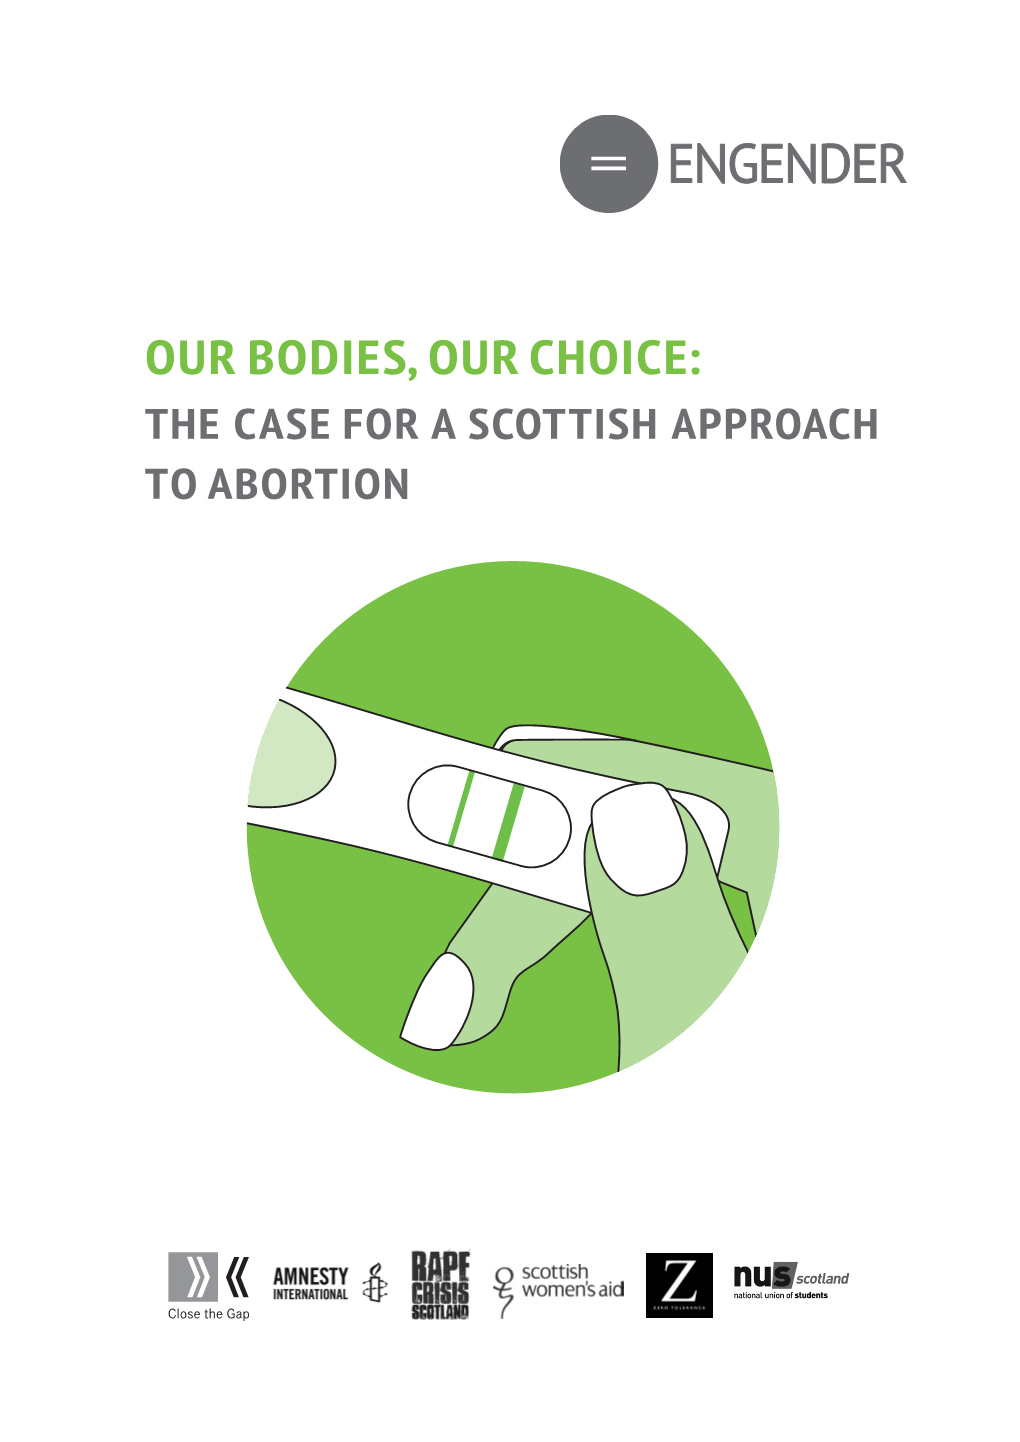 Our Bodies, Our Choice: the Case for a Scottish Approach to Abortion